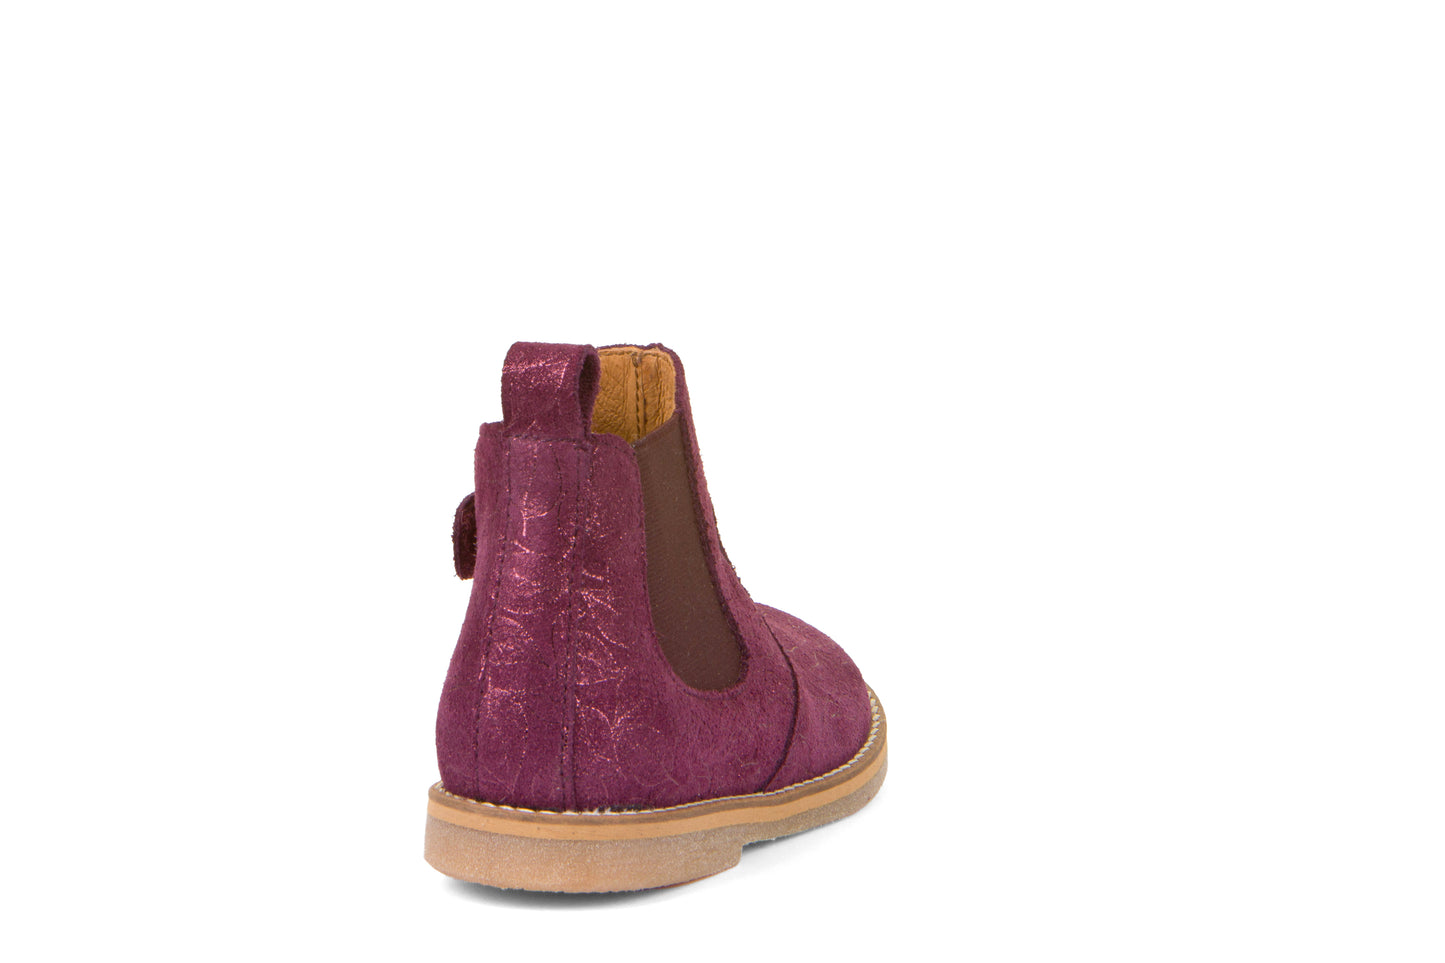 Chelys Low Chelsea Boot in Grape Wine Nubuk Leather